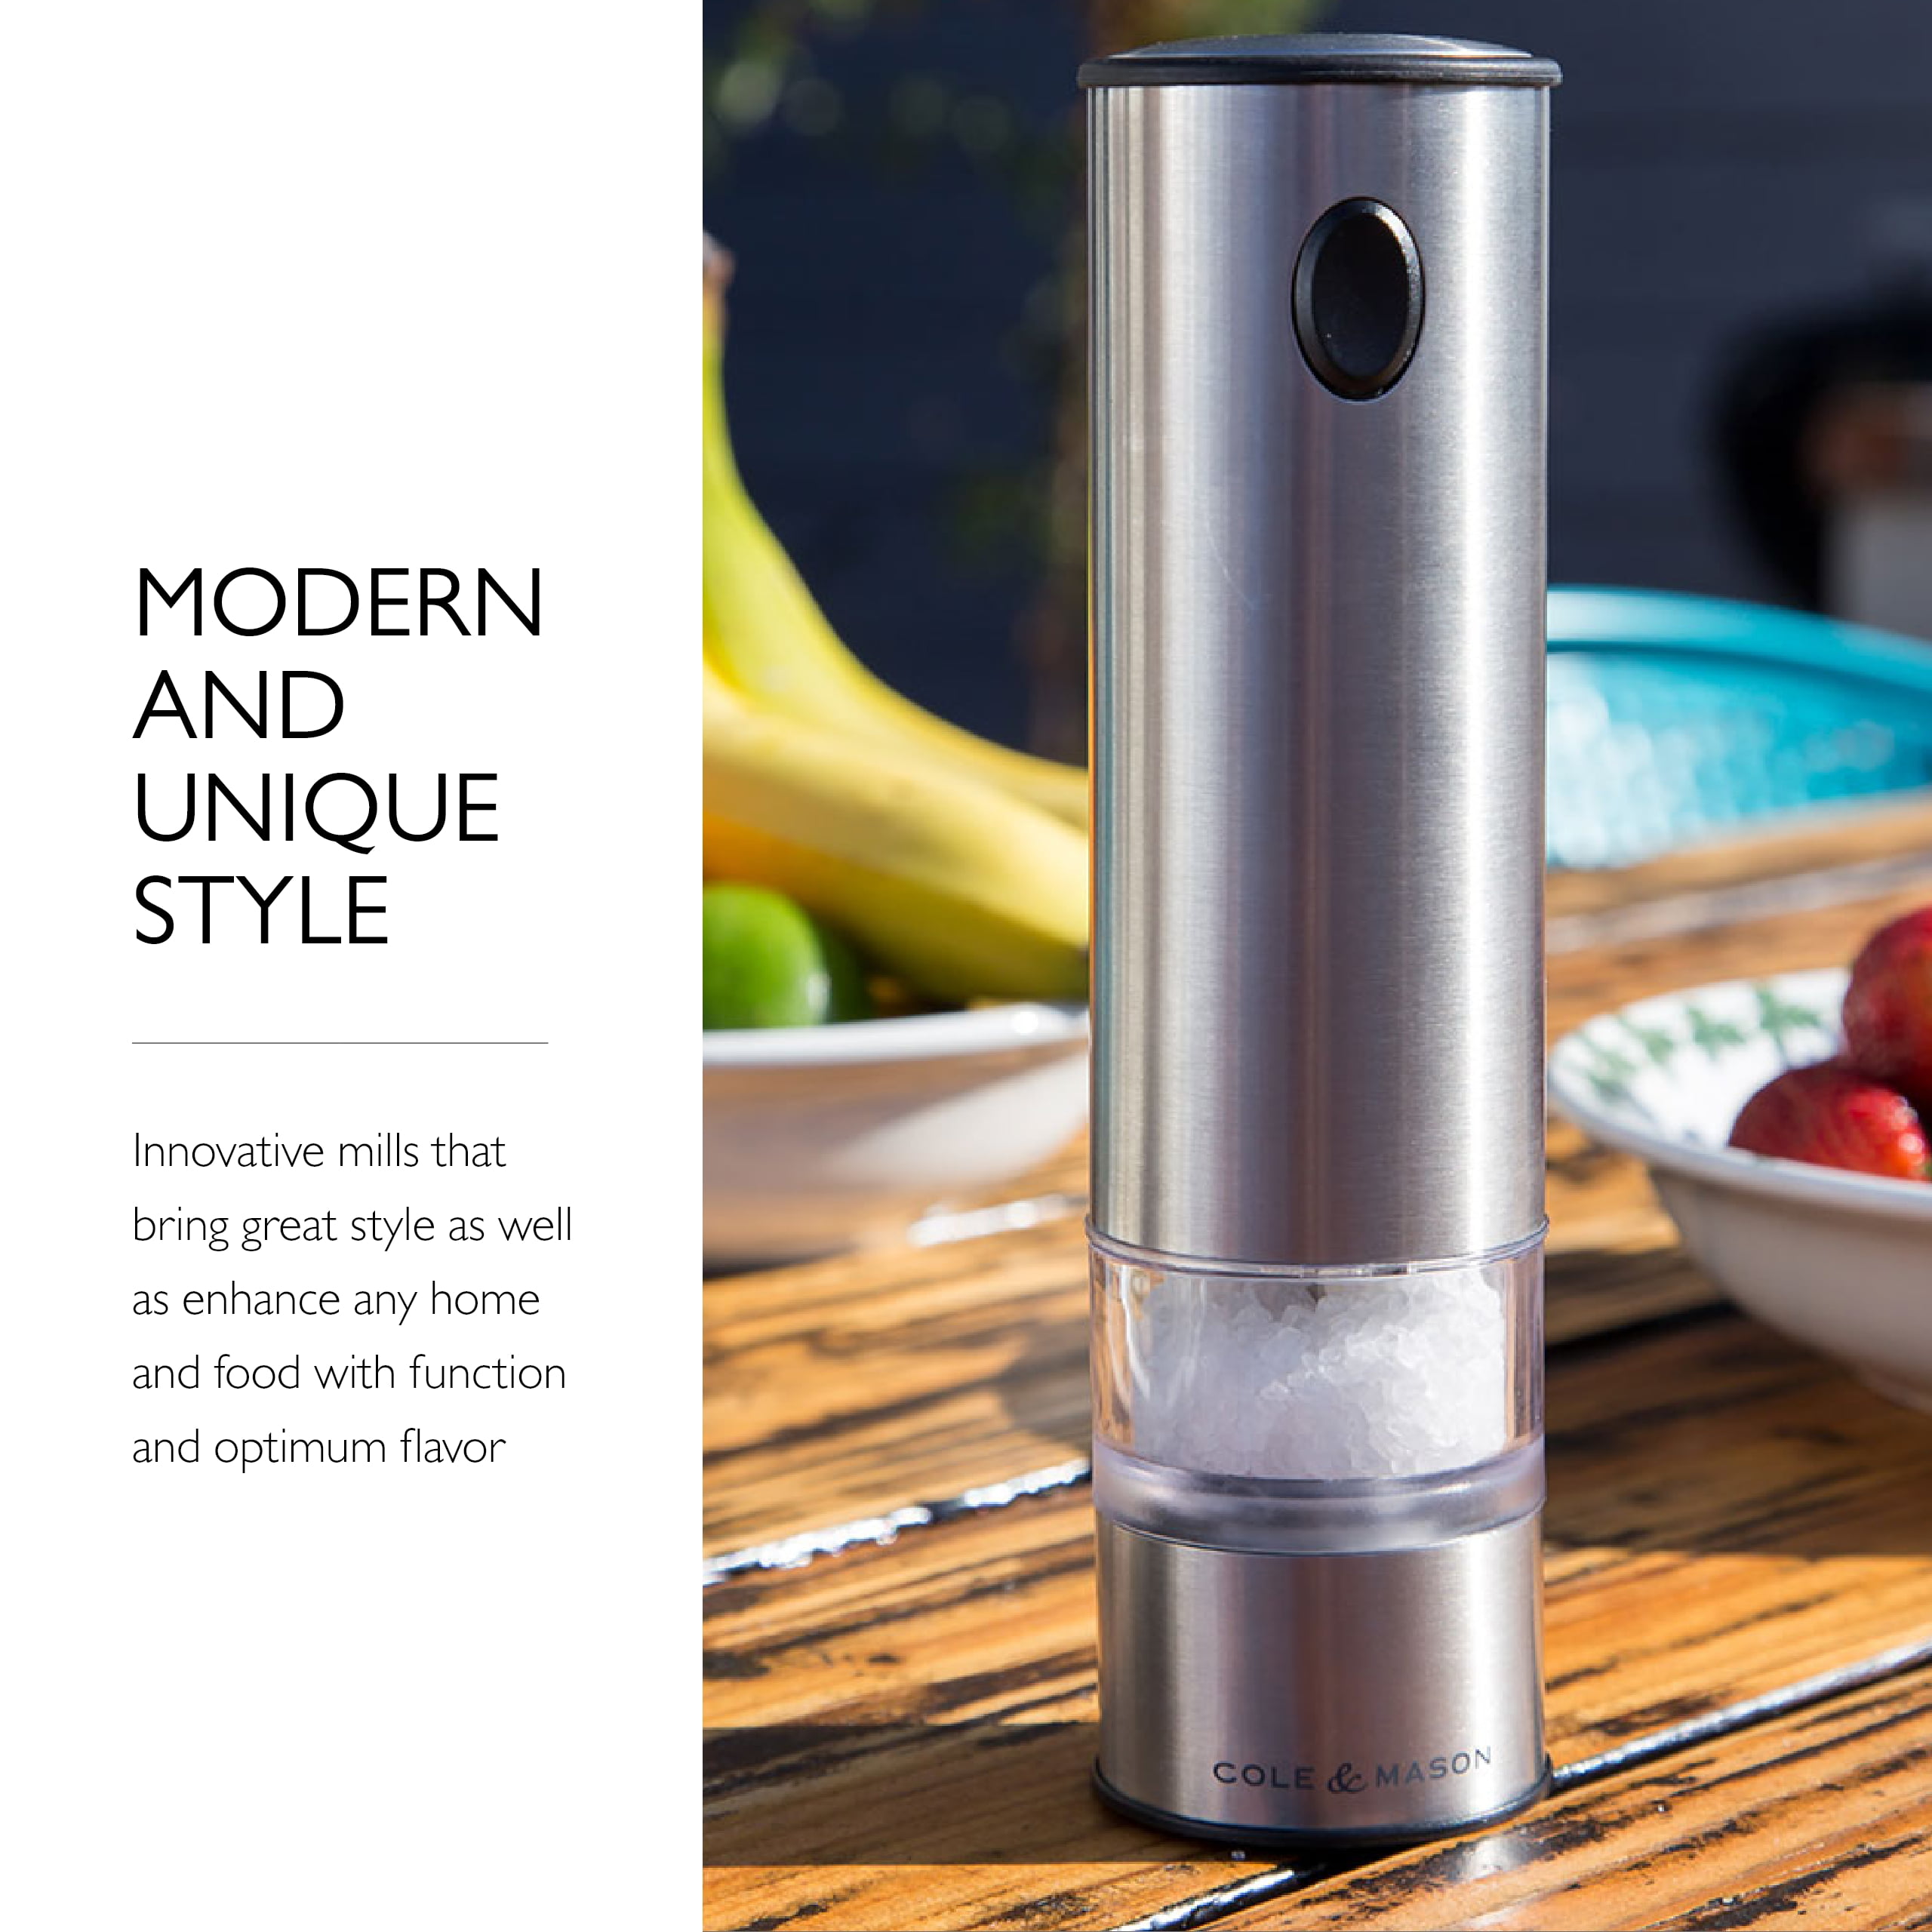 GreenLife Salt and Pepper Grinder, Mess-Free Ratchet Mill, Adjustable Coarseness and Easily Refillable, White 1/3 Cup Capacity